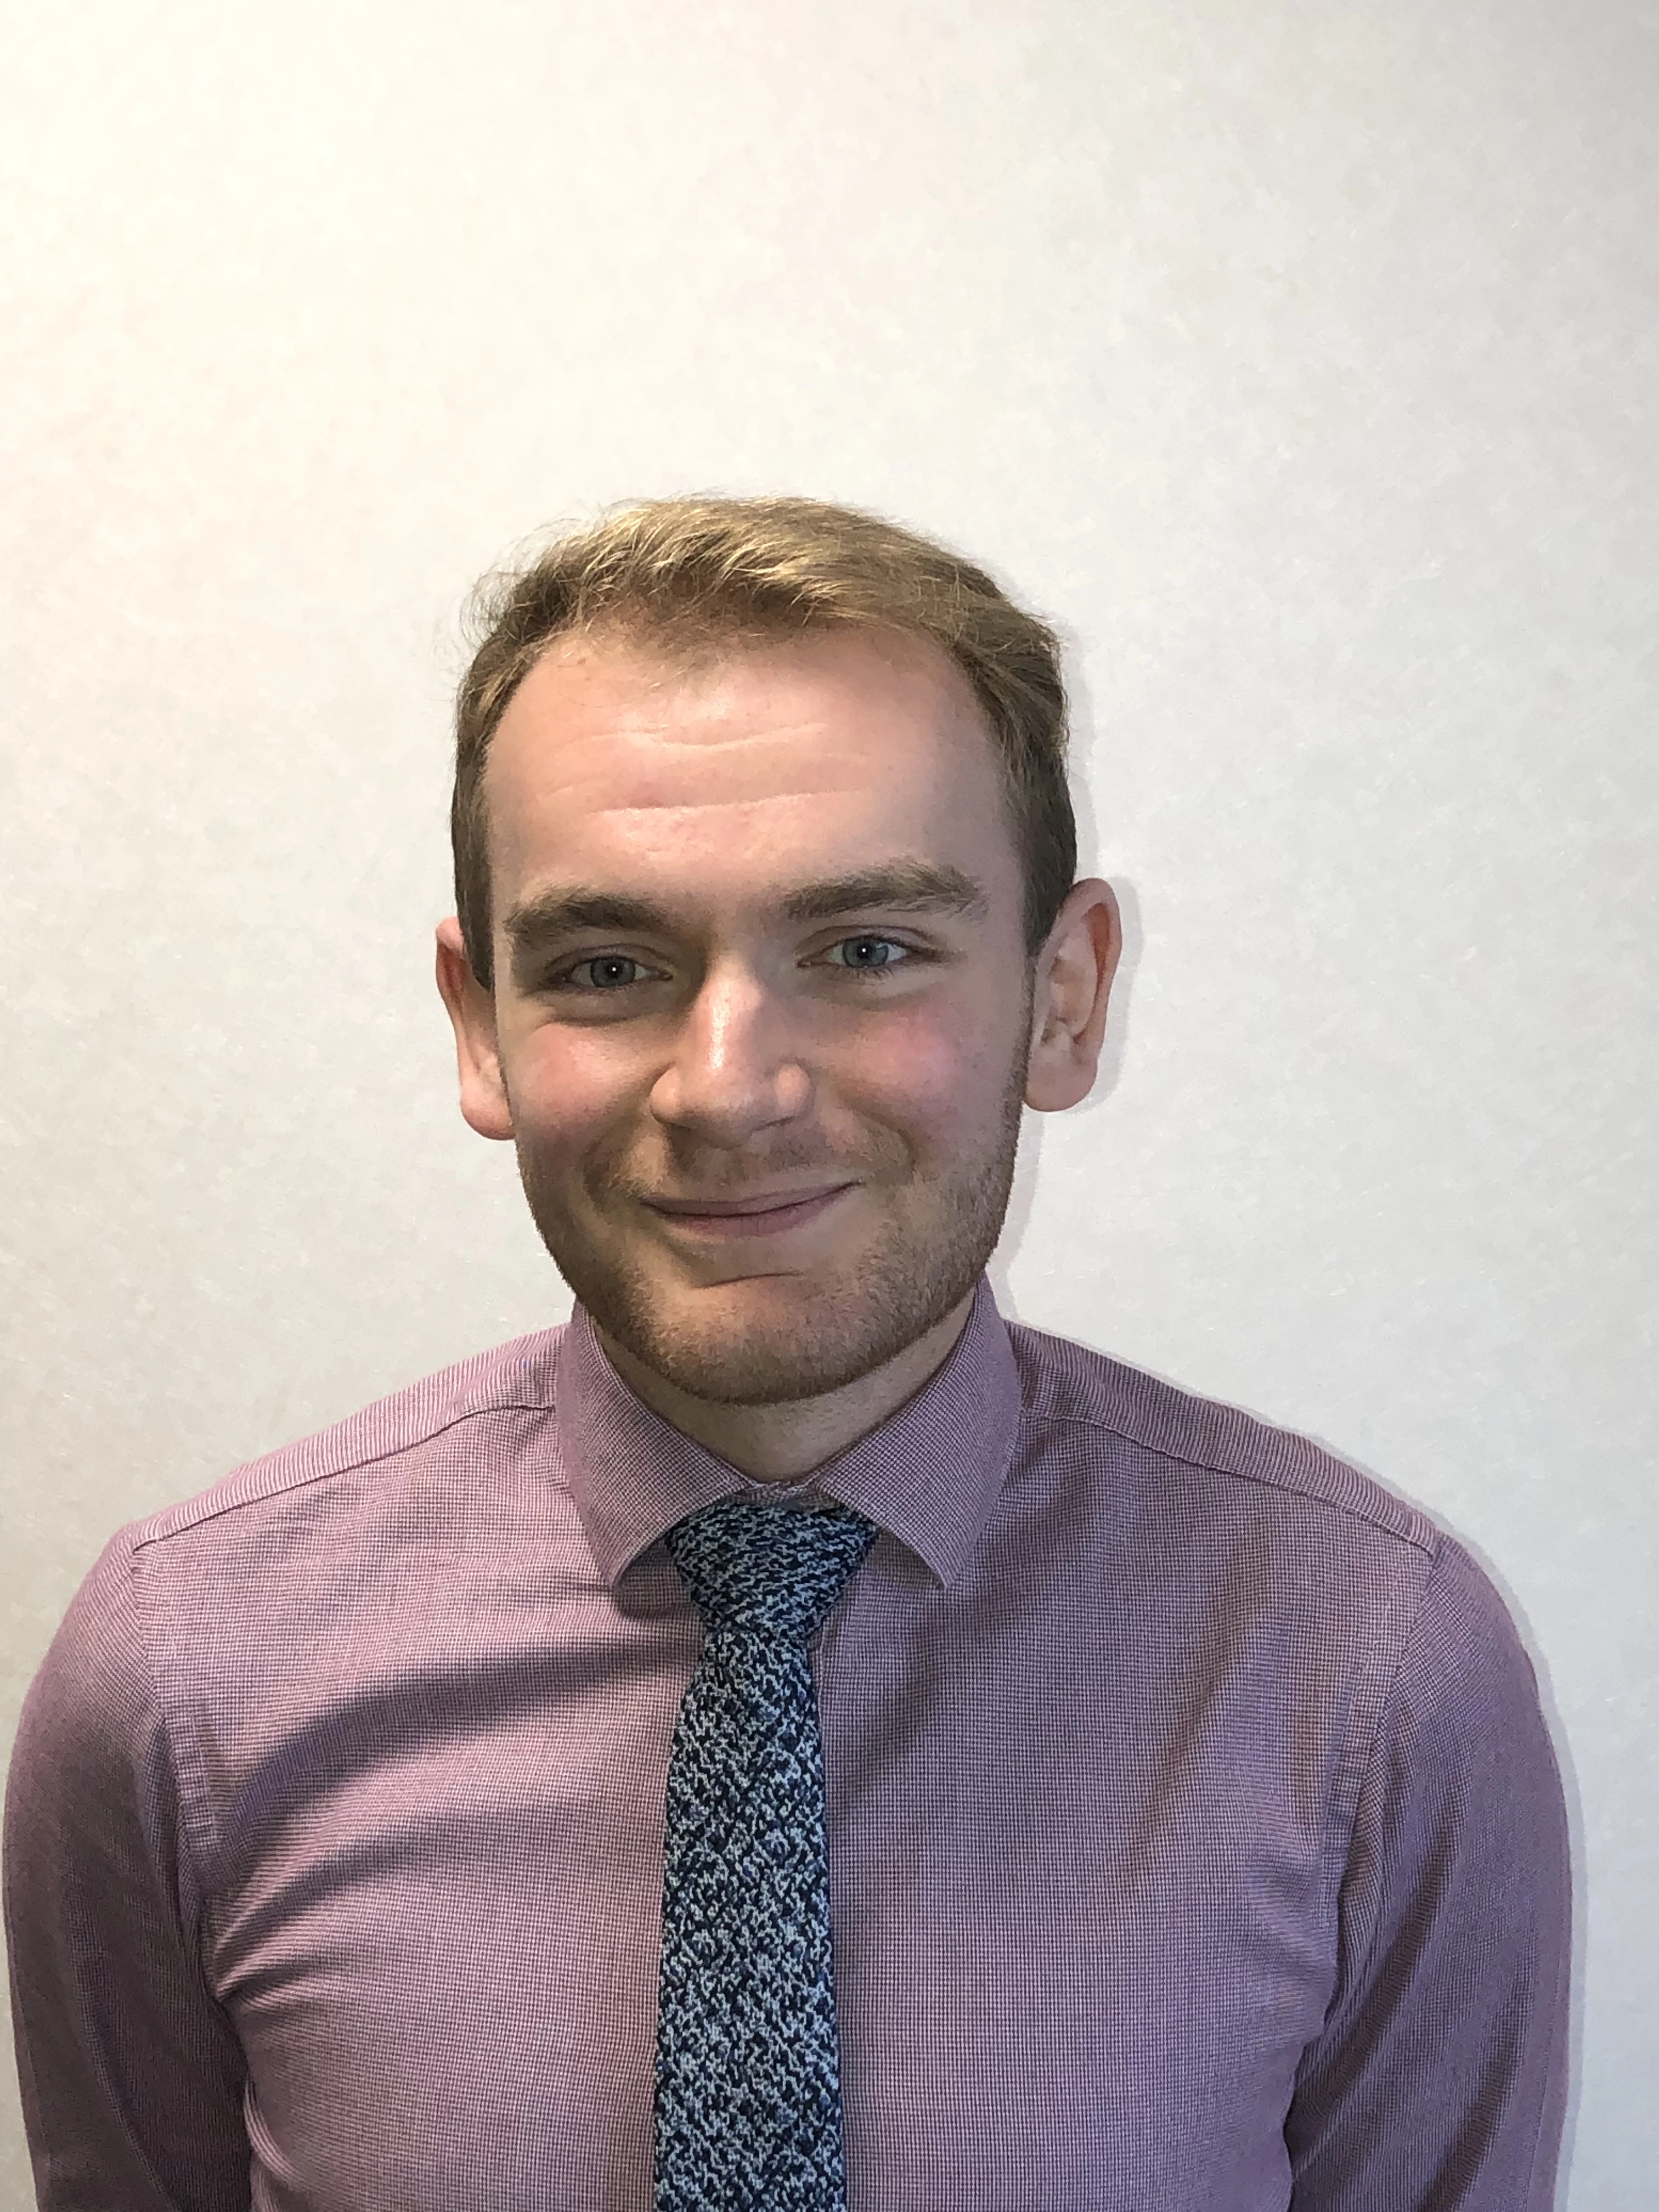 Pierce’s Lewis Withnell has become a Chartered Accountant after gaining the ICAEW (Institute of Chartered Accountants in England and Wales) ACA qualification. 